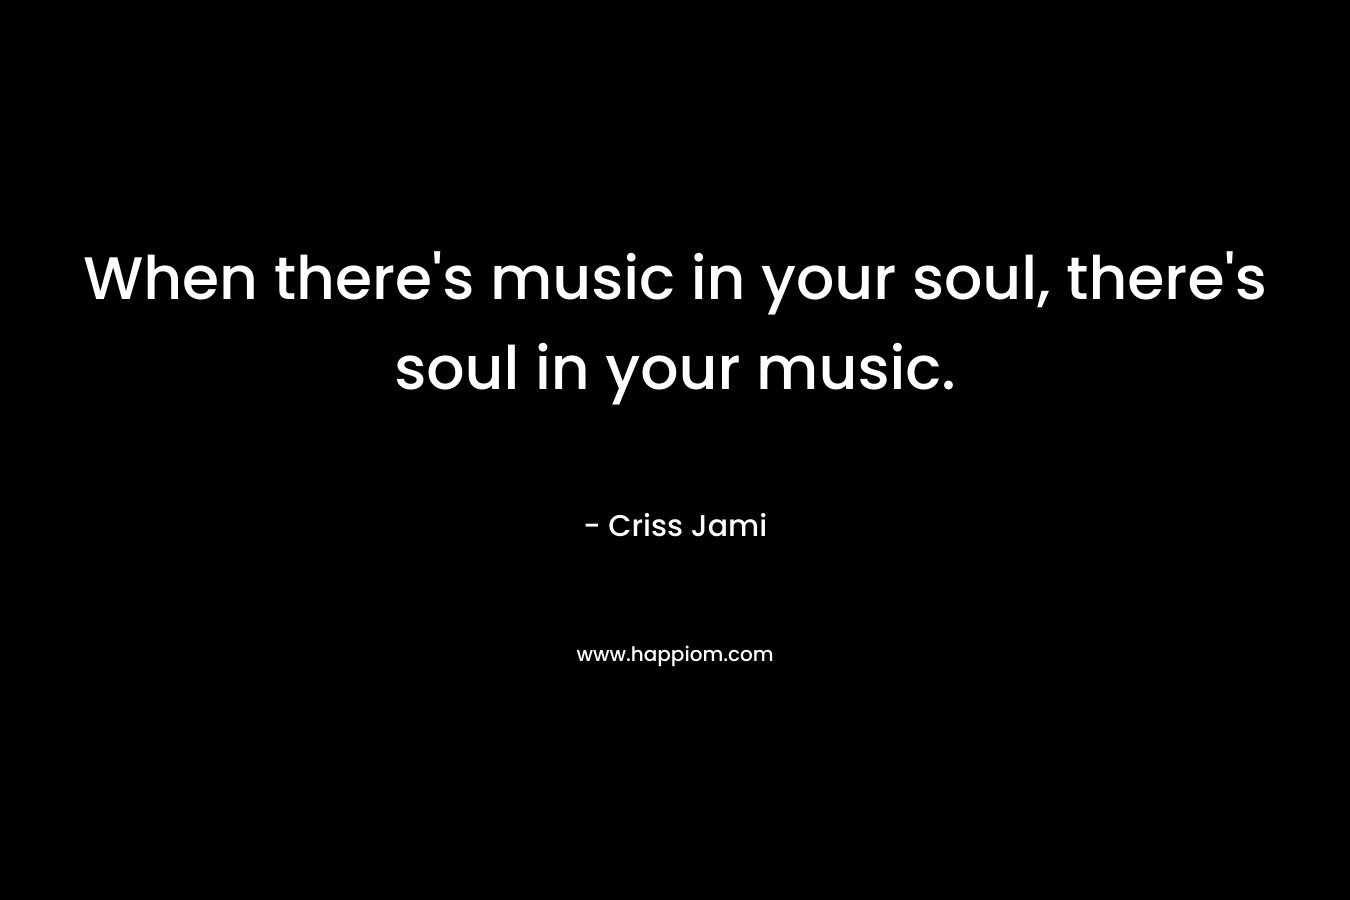 When there's music in your soul, there's soul in your music.